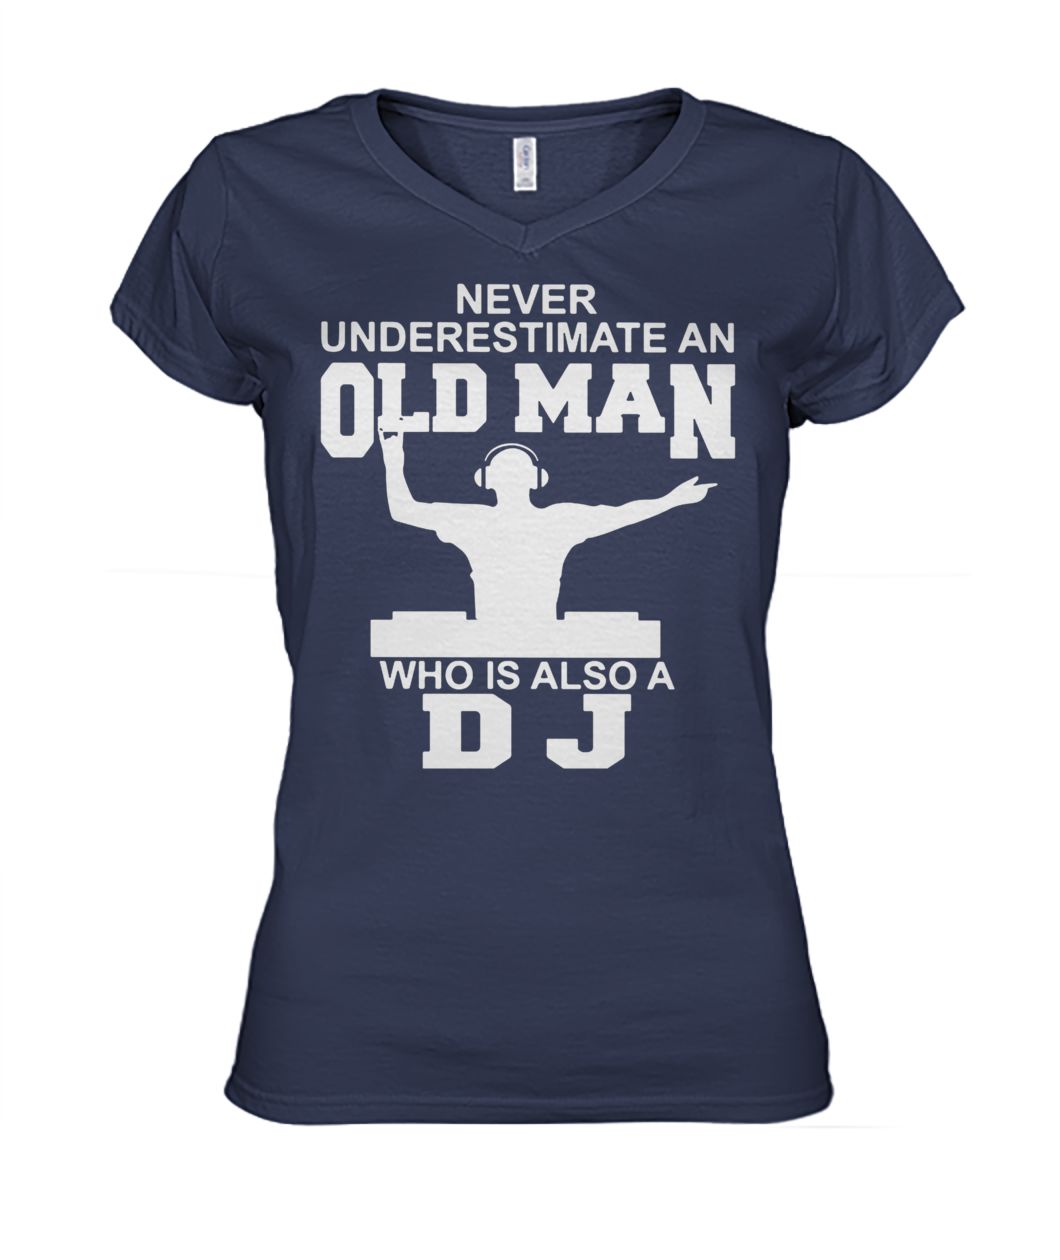 Never underestimate an old man who is also a DJ women's v-neck